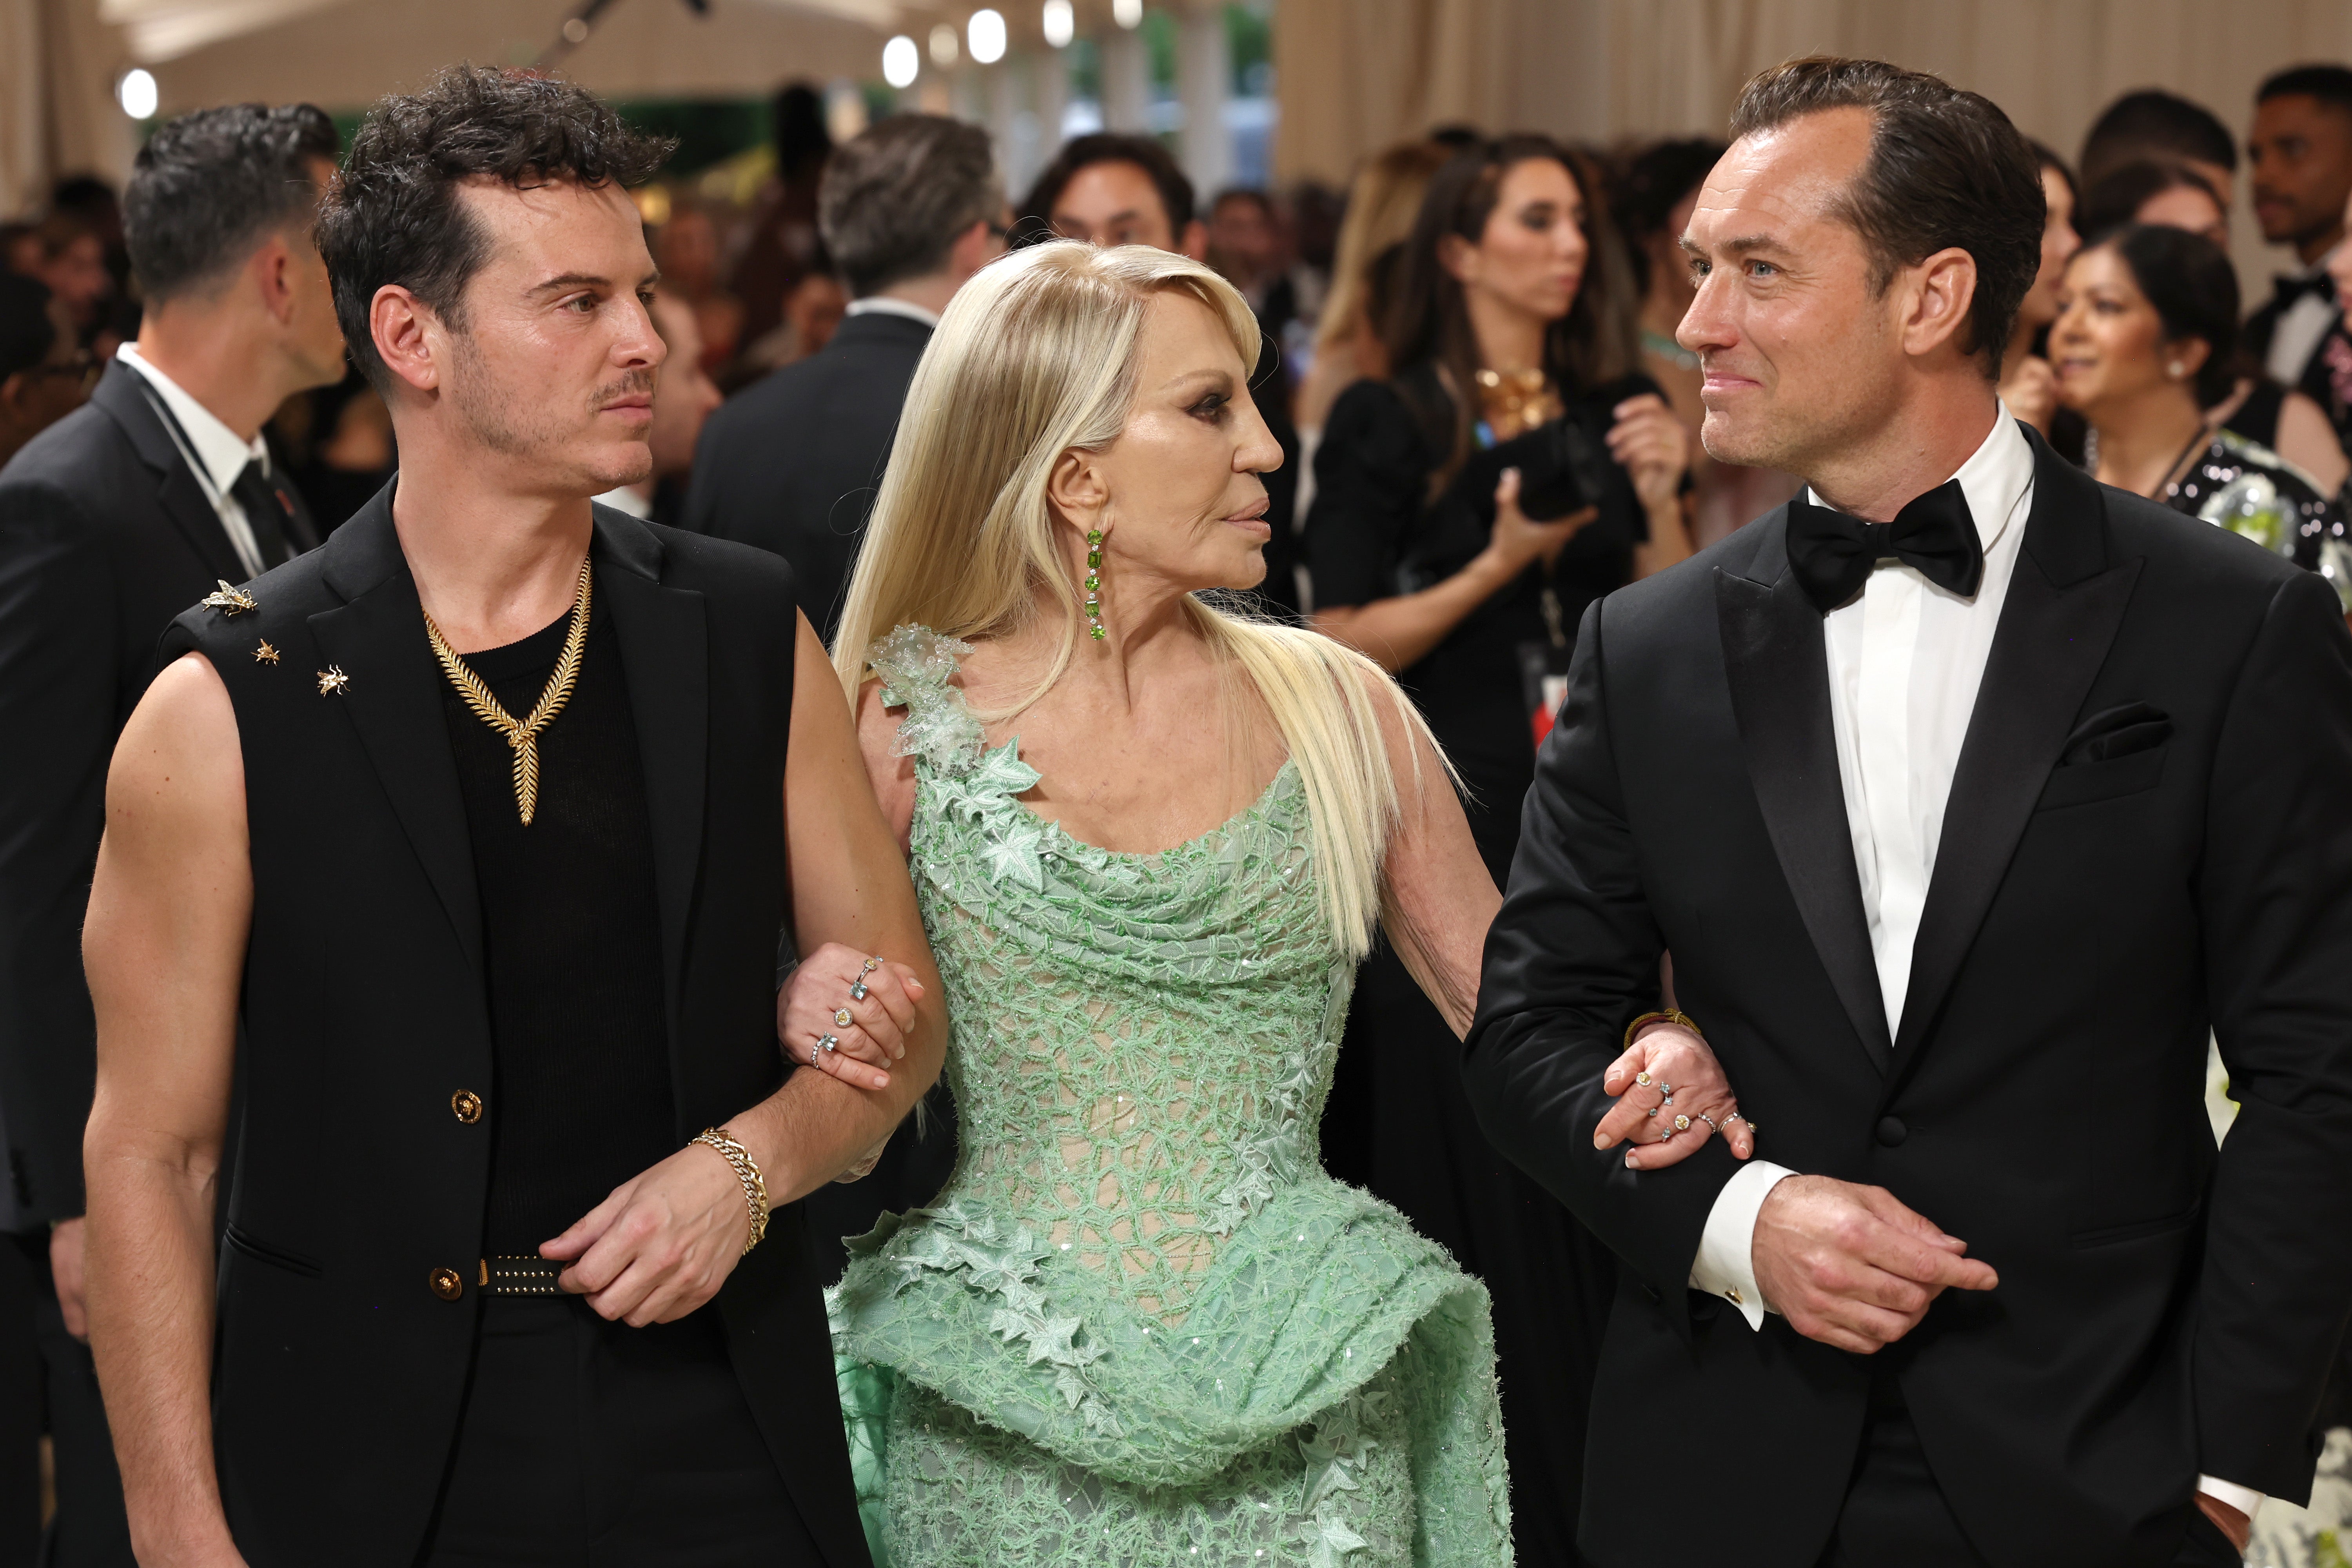 Law and Scott were joined by Donatella Versace